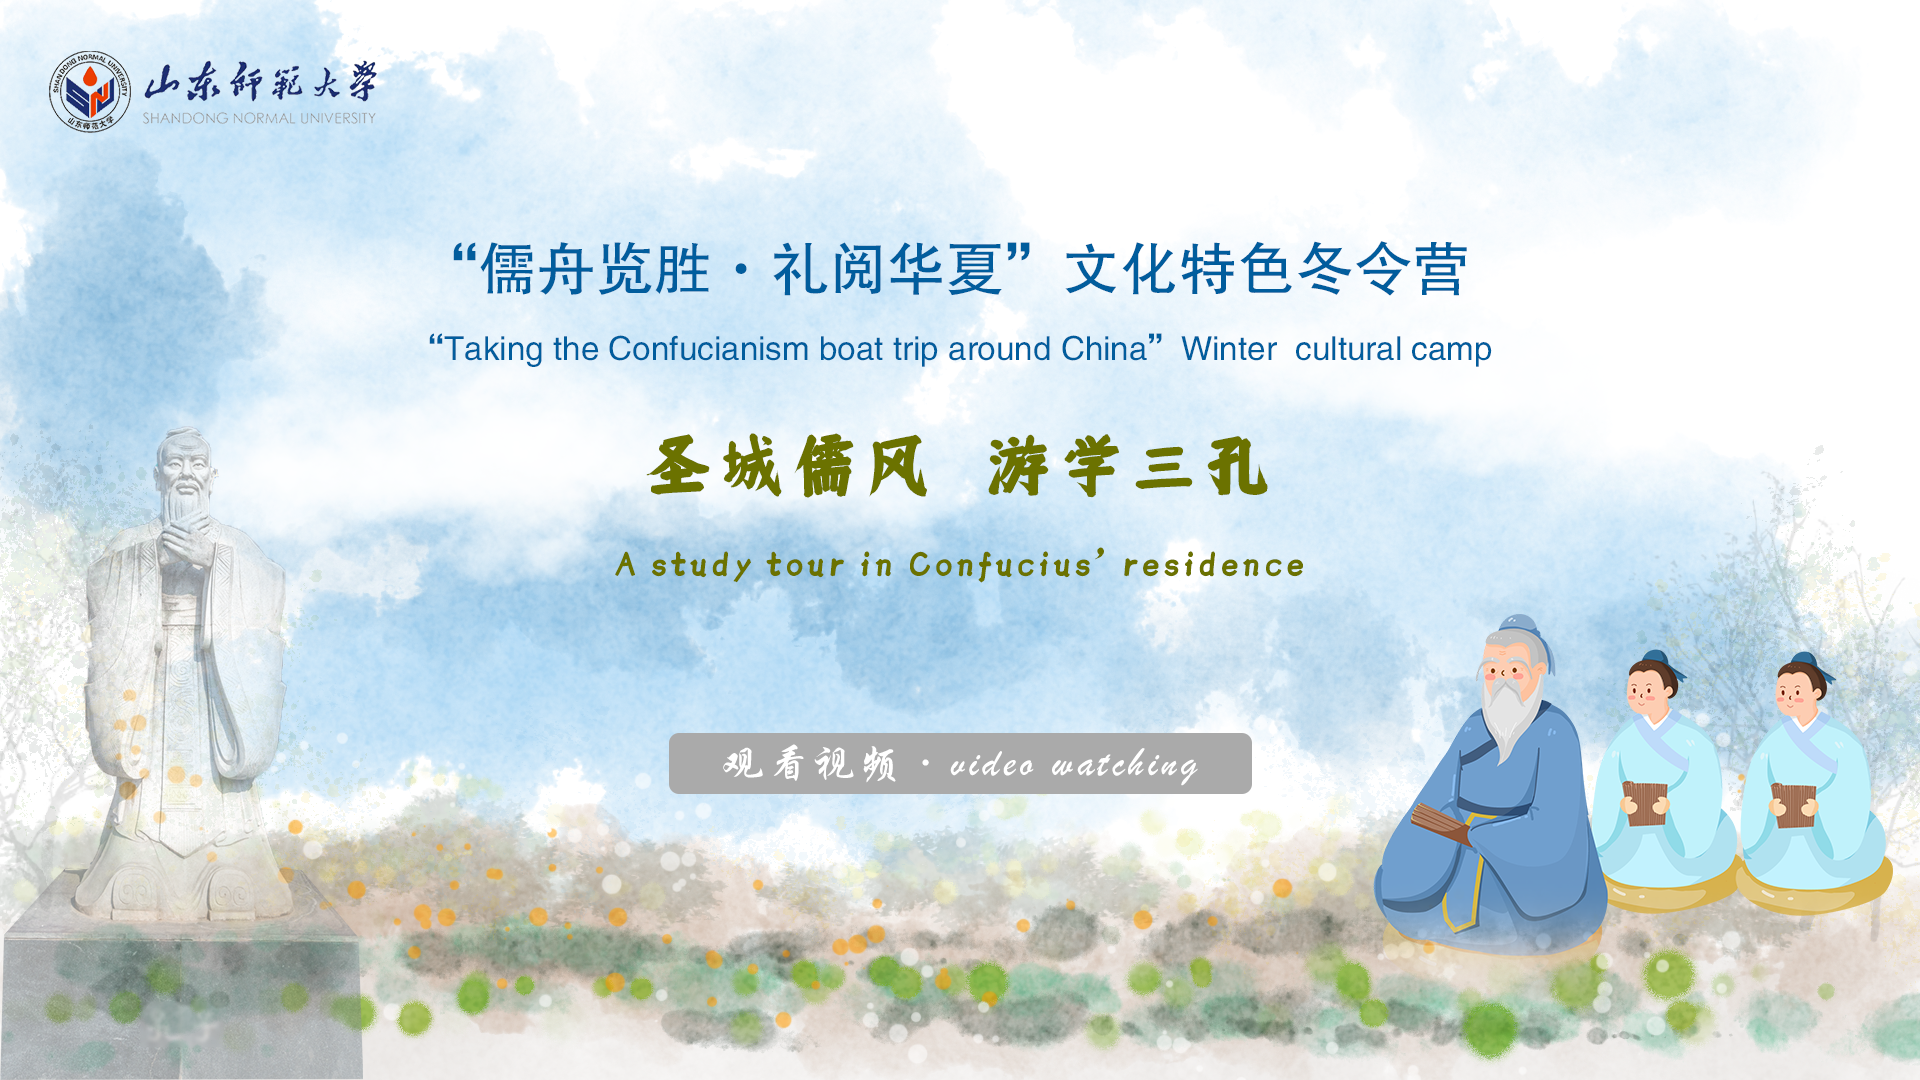 Join a study tour in Confucius’former residence